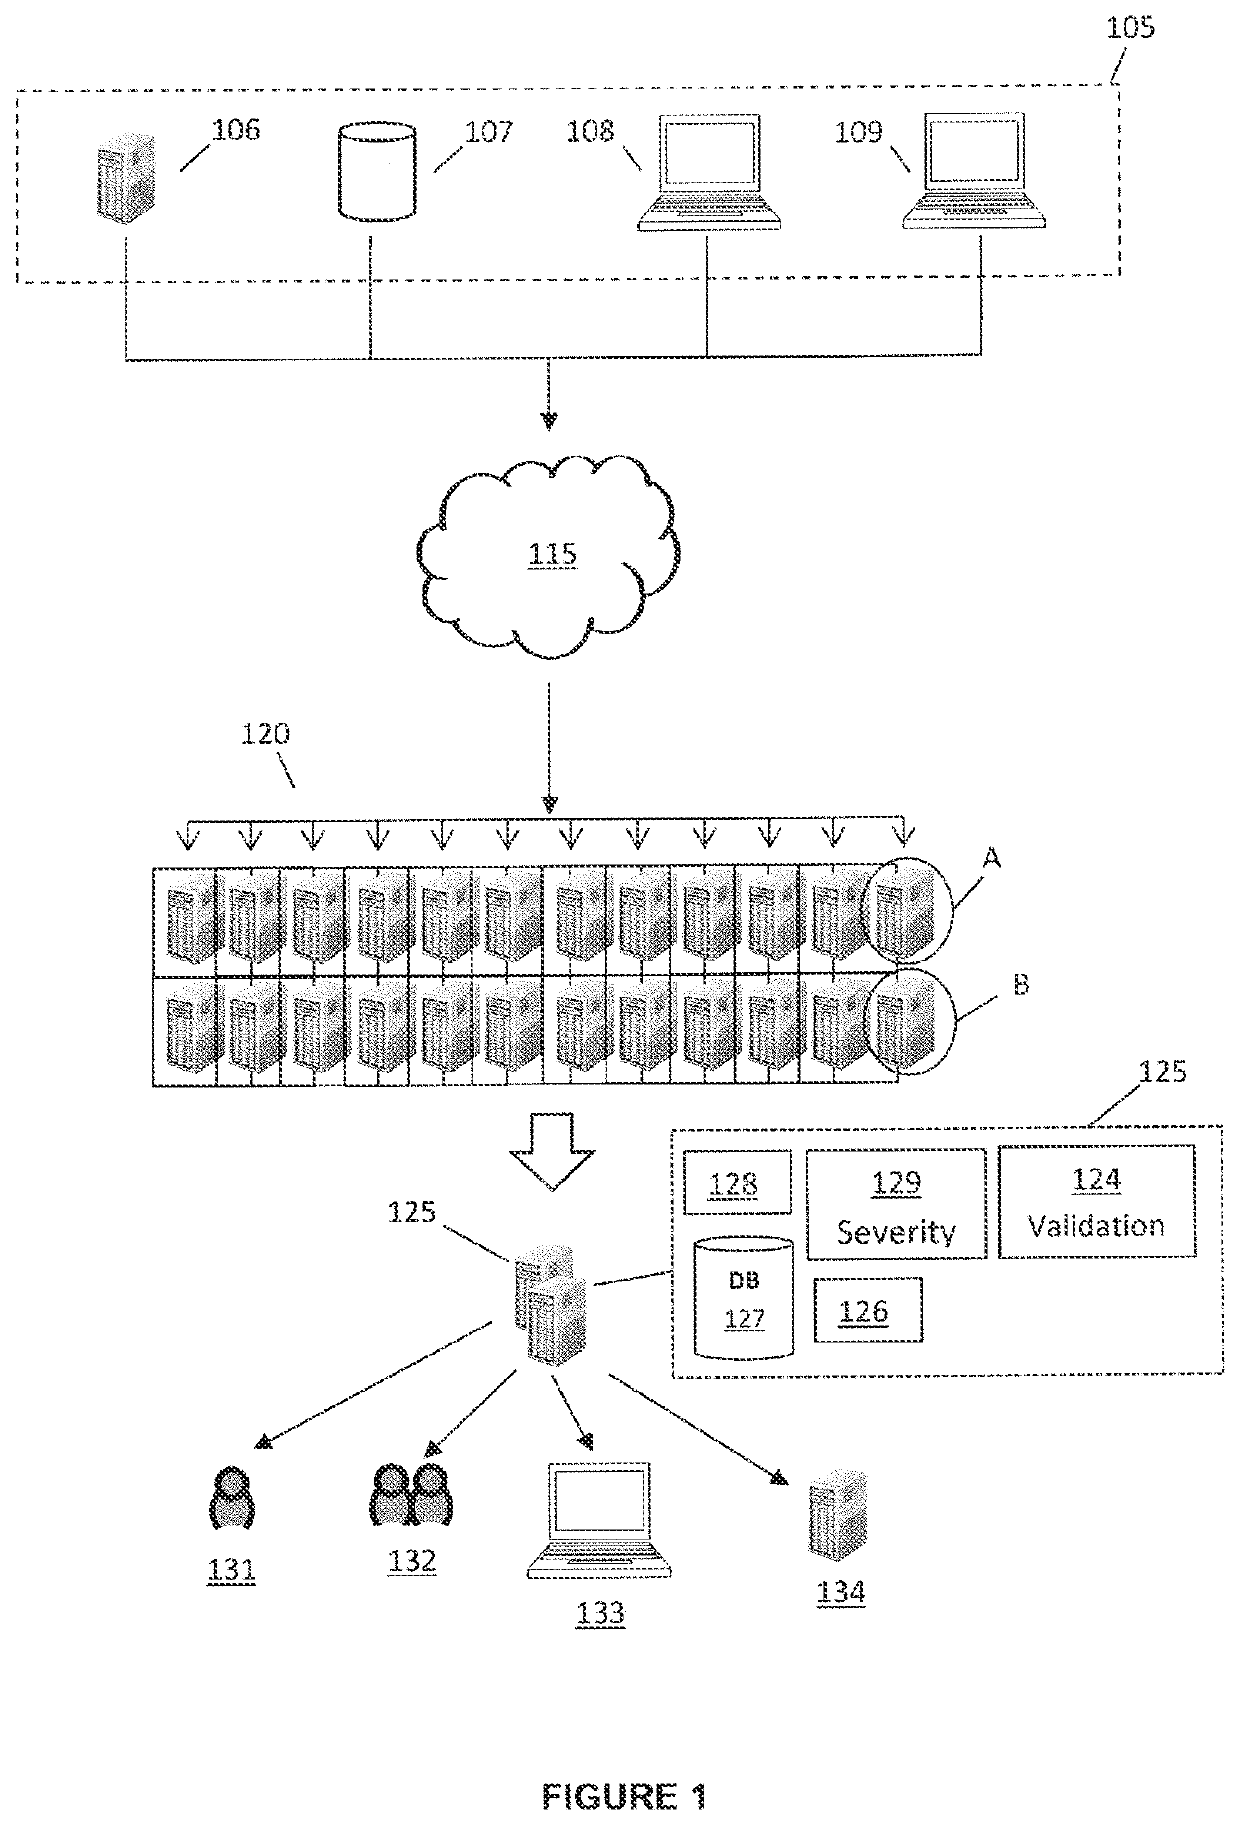 System and method for high speed threat intelligence management using unsupervised machine learning and prioritization algorithms